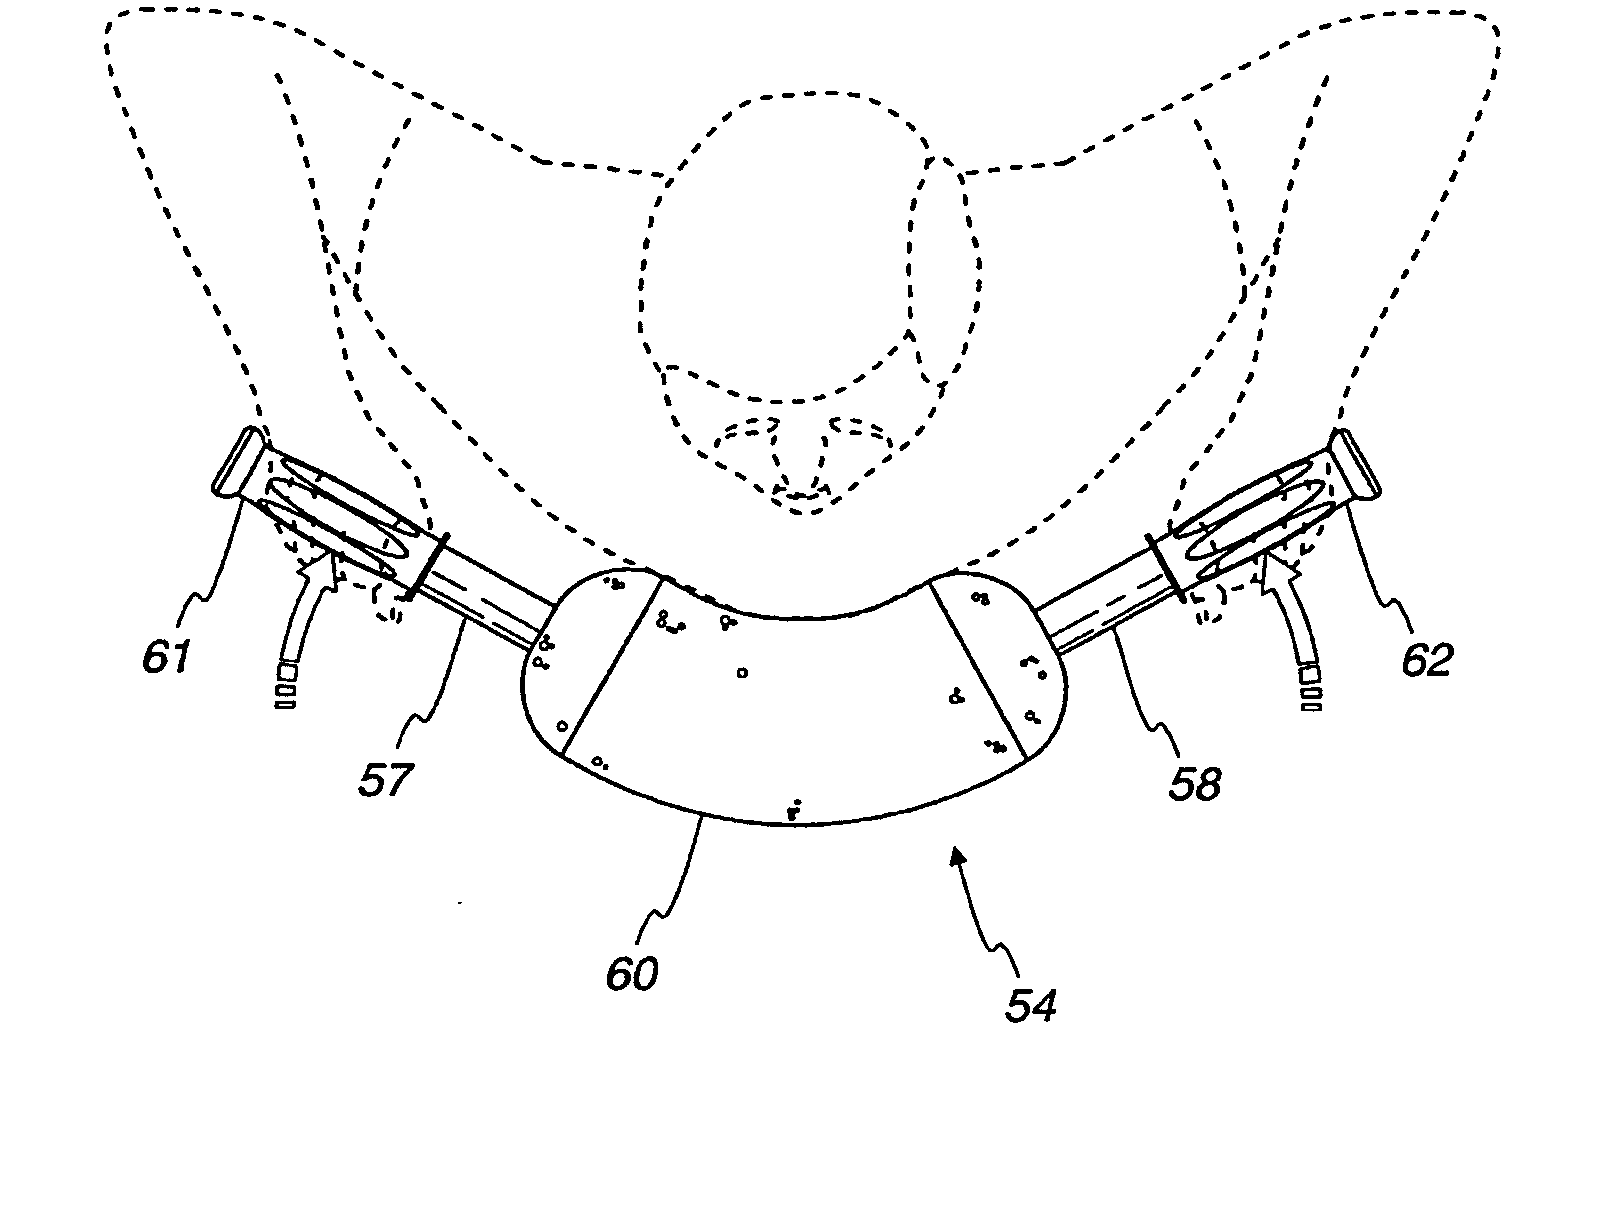 Exercise device and methods